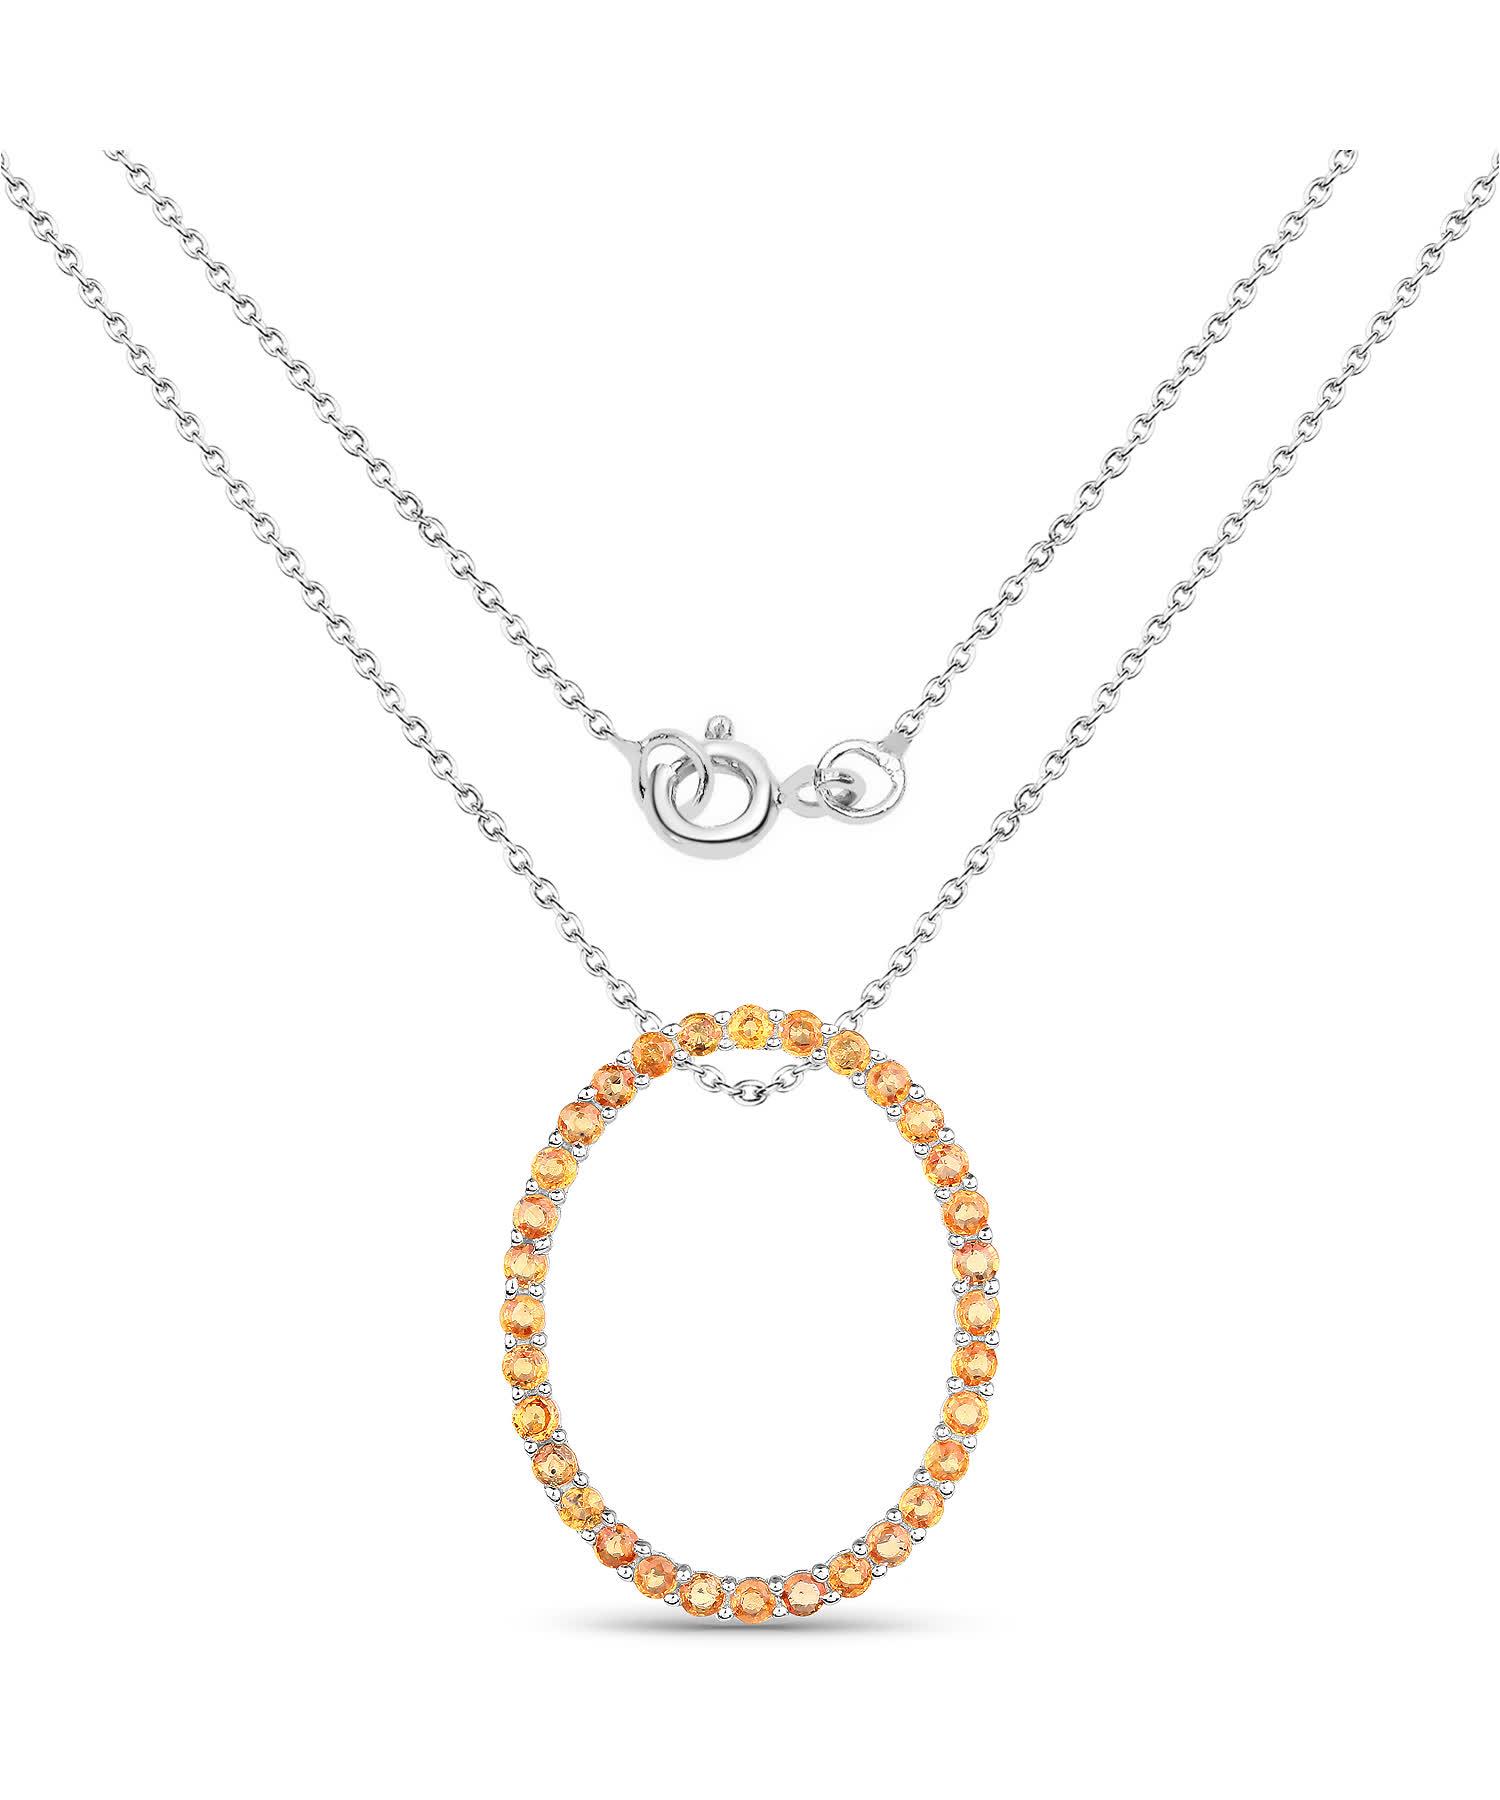 2.88ctw Natural Orange Sapphire Rhodium Plated 925 Sterling Silver Oval Pendant With Chain View 2